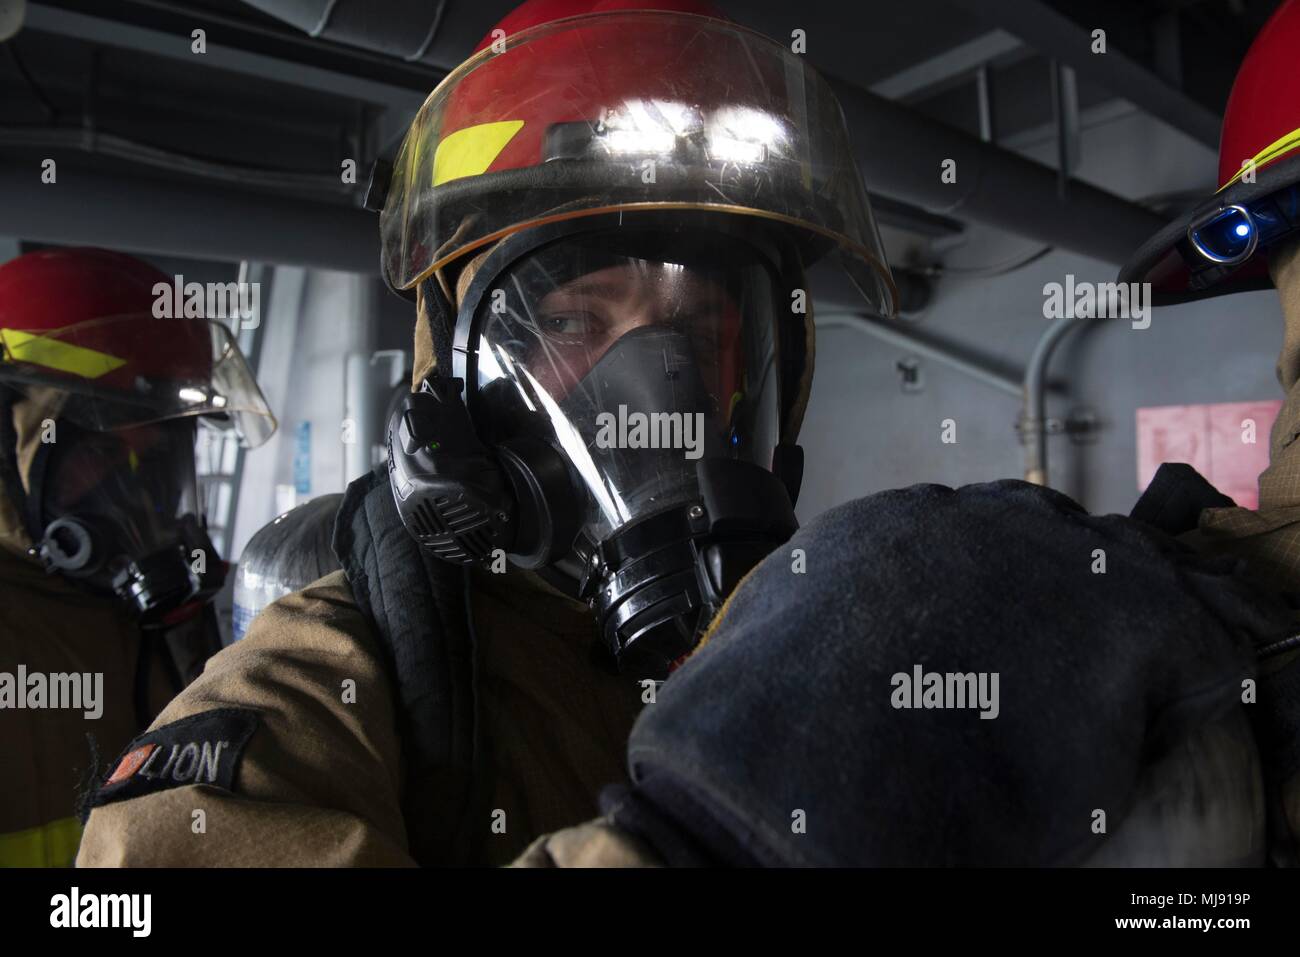 180421-N-ZH683-166 ATLANTIC OCEAN (Apr. 21, 2018) Aviation Machinist's Mate Airman Brandon Parmalee mans a fire team on a weather deck during a general quarters drill aboard USS Harry S. Truman (CVN 75). Truman is currently deployed as part of an ongoing rotation of U.S. forces supporting maritime security operations in international waters around the globe. (U.S. Navy photo by Mass Communication Specialist 3rd Class Juan Sotolongo/Released) Stock Photo